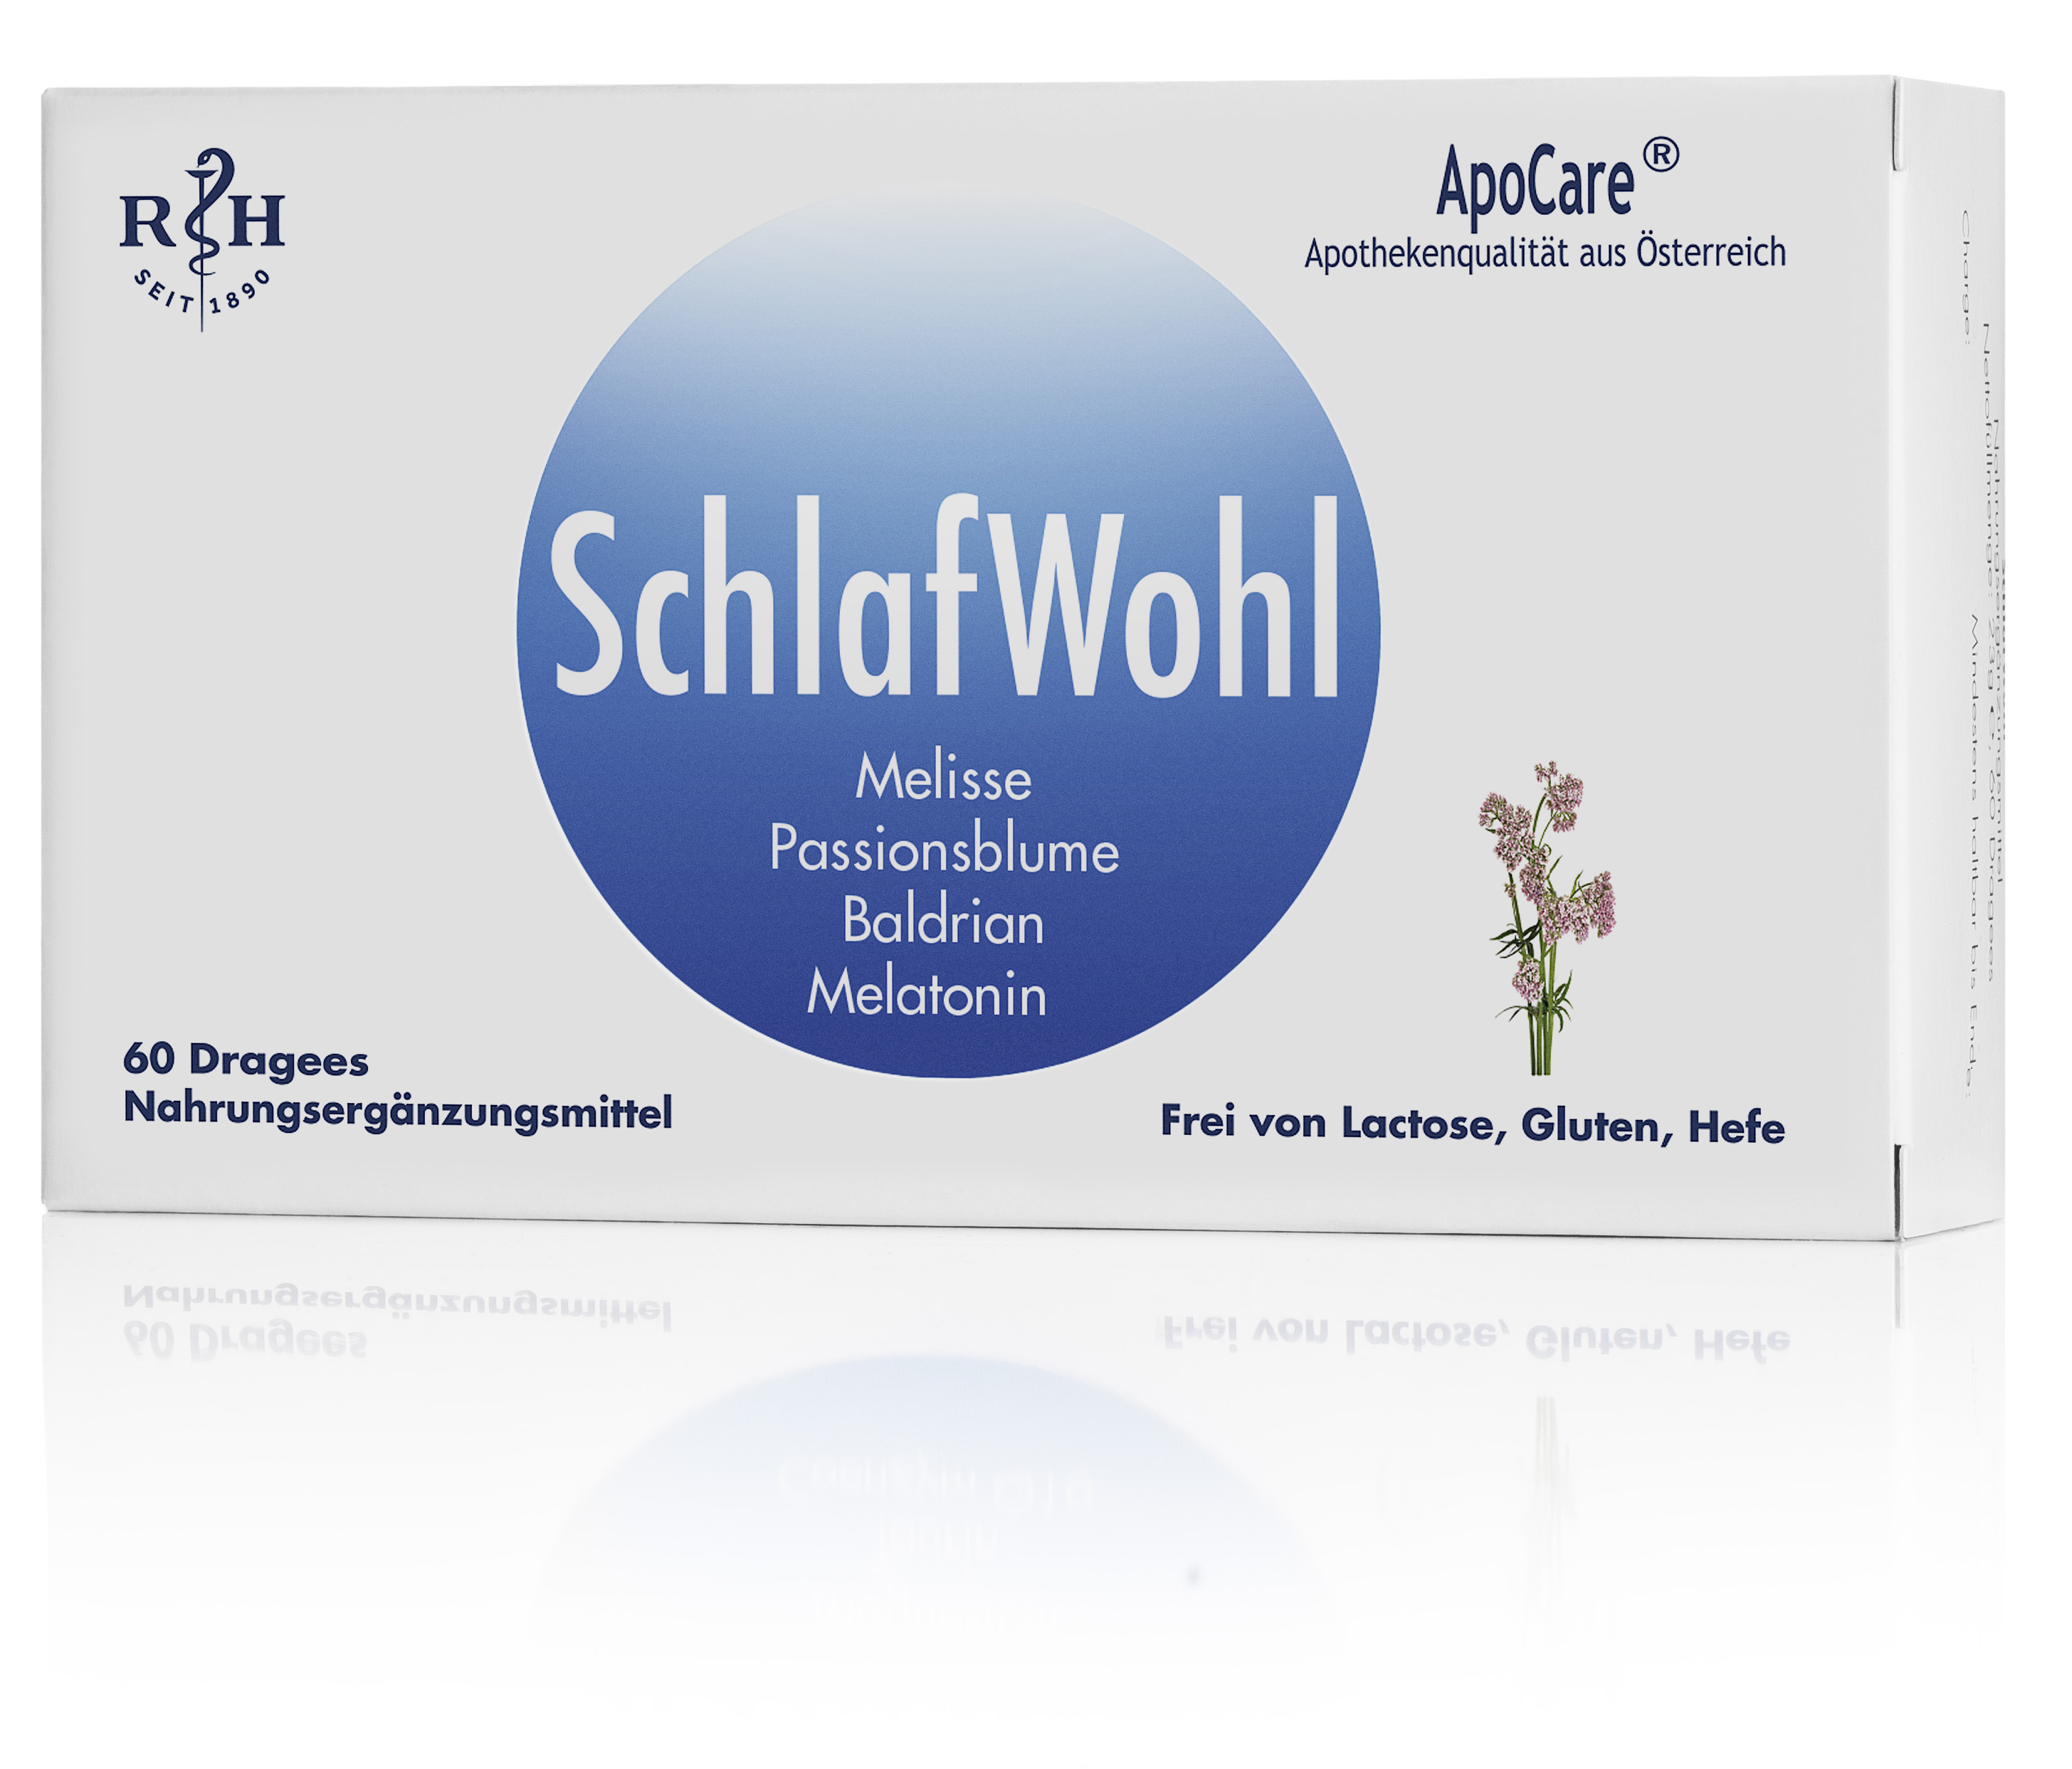 Apocare Schlaf Wohl Dragees 60 Stk.